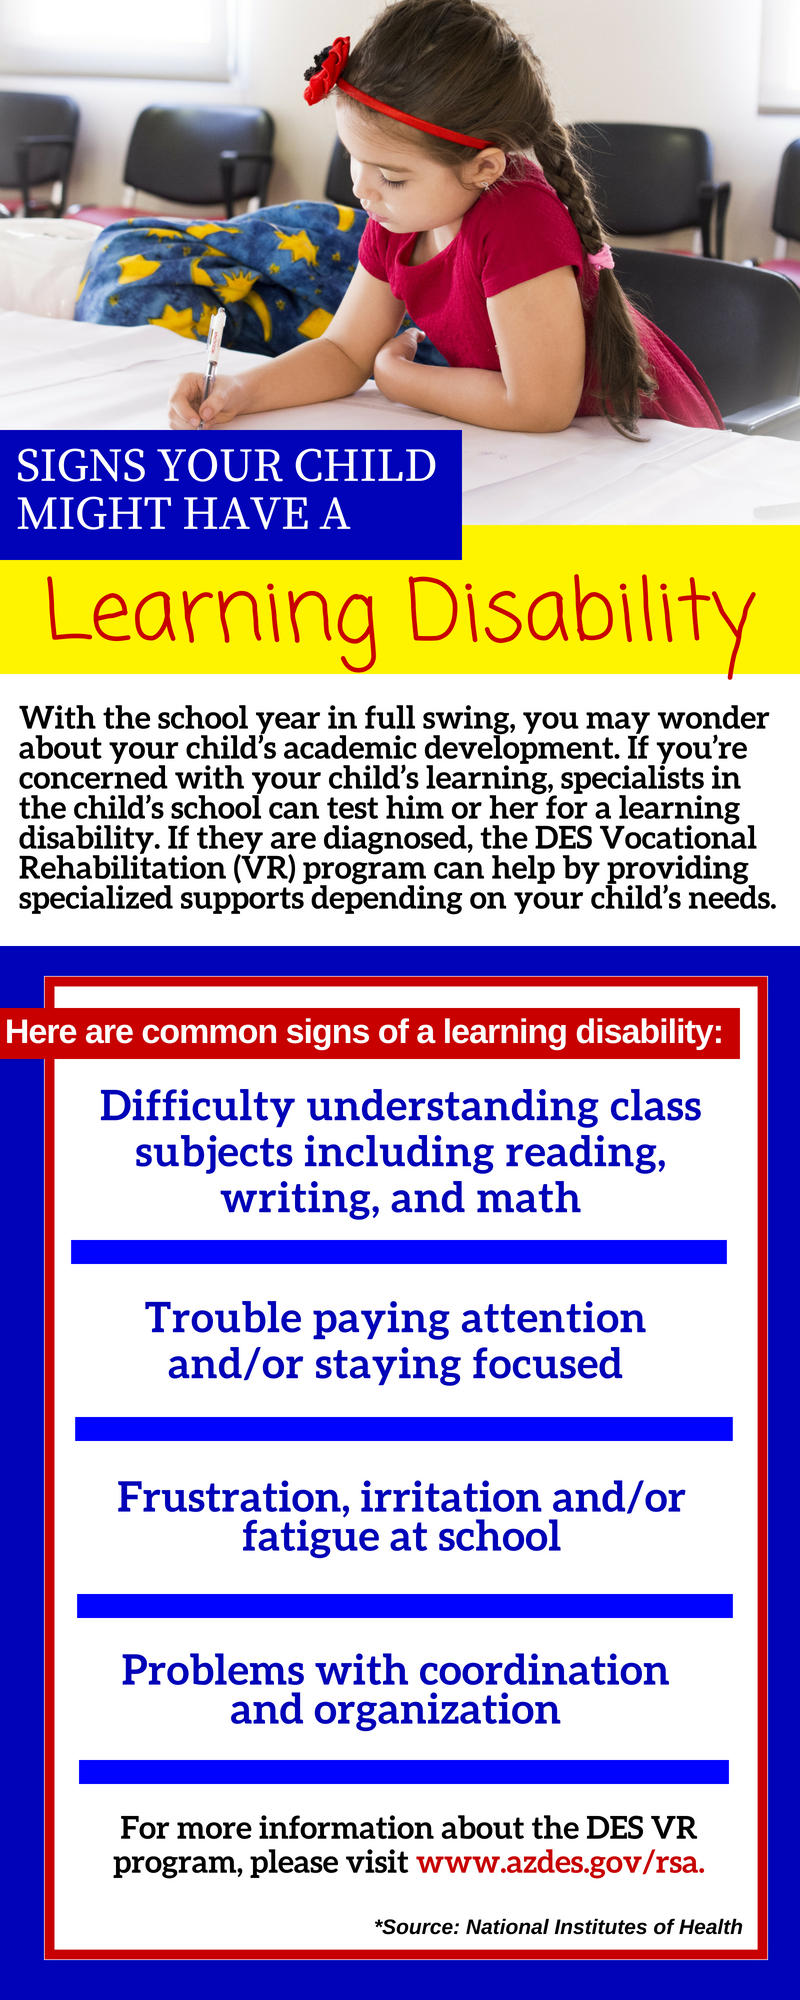 Information about learning disabilities in children